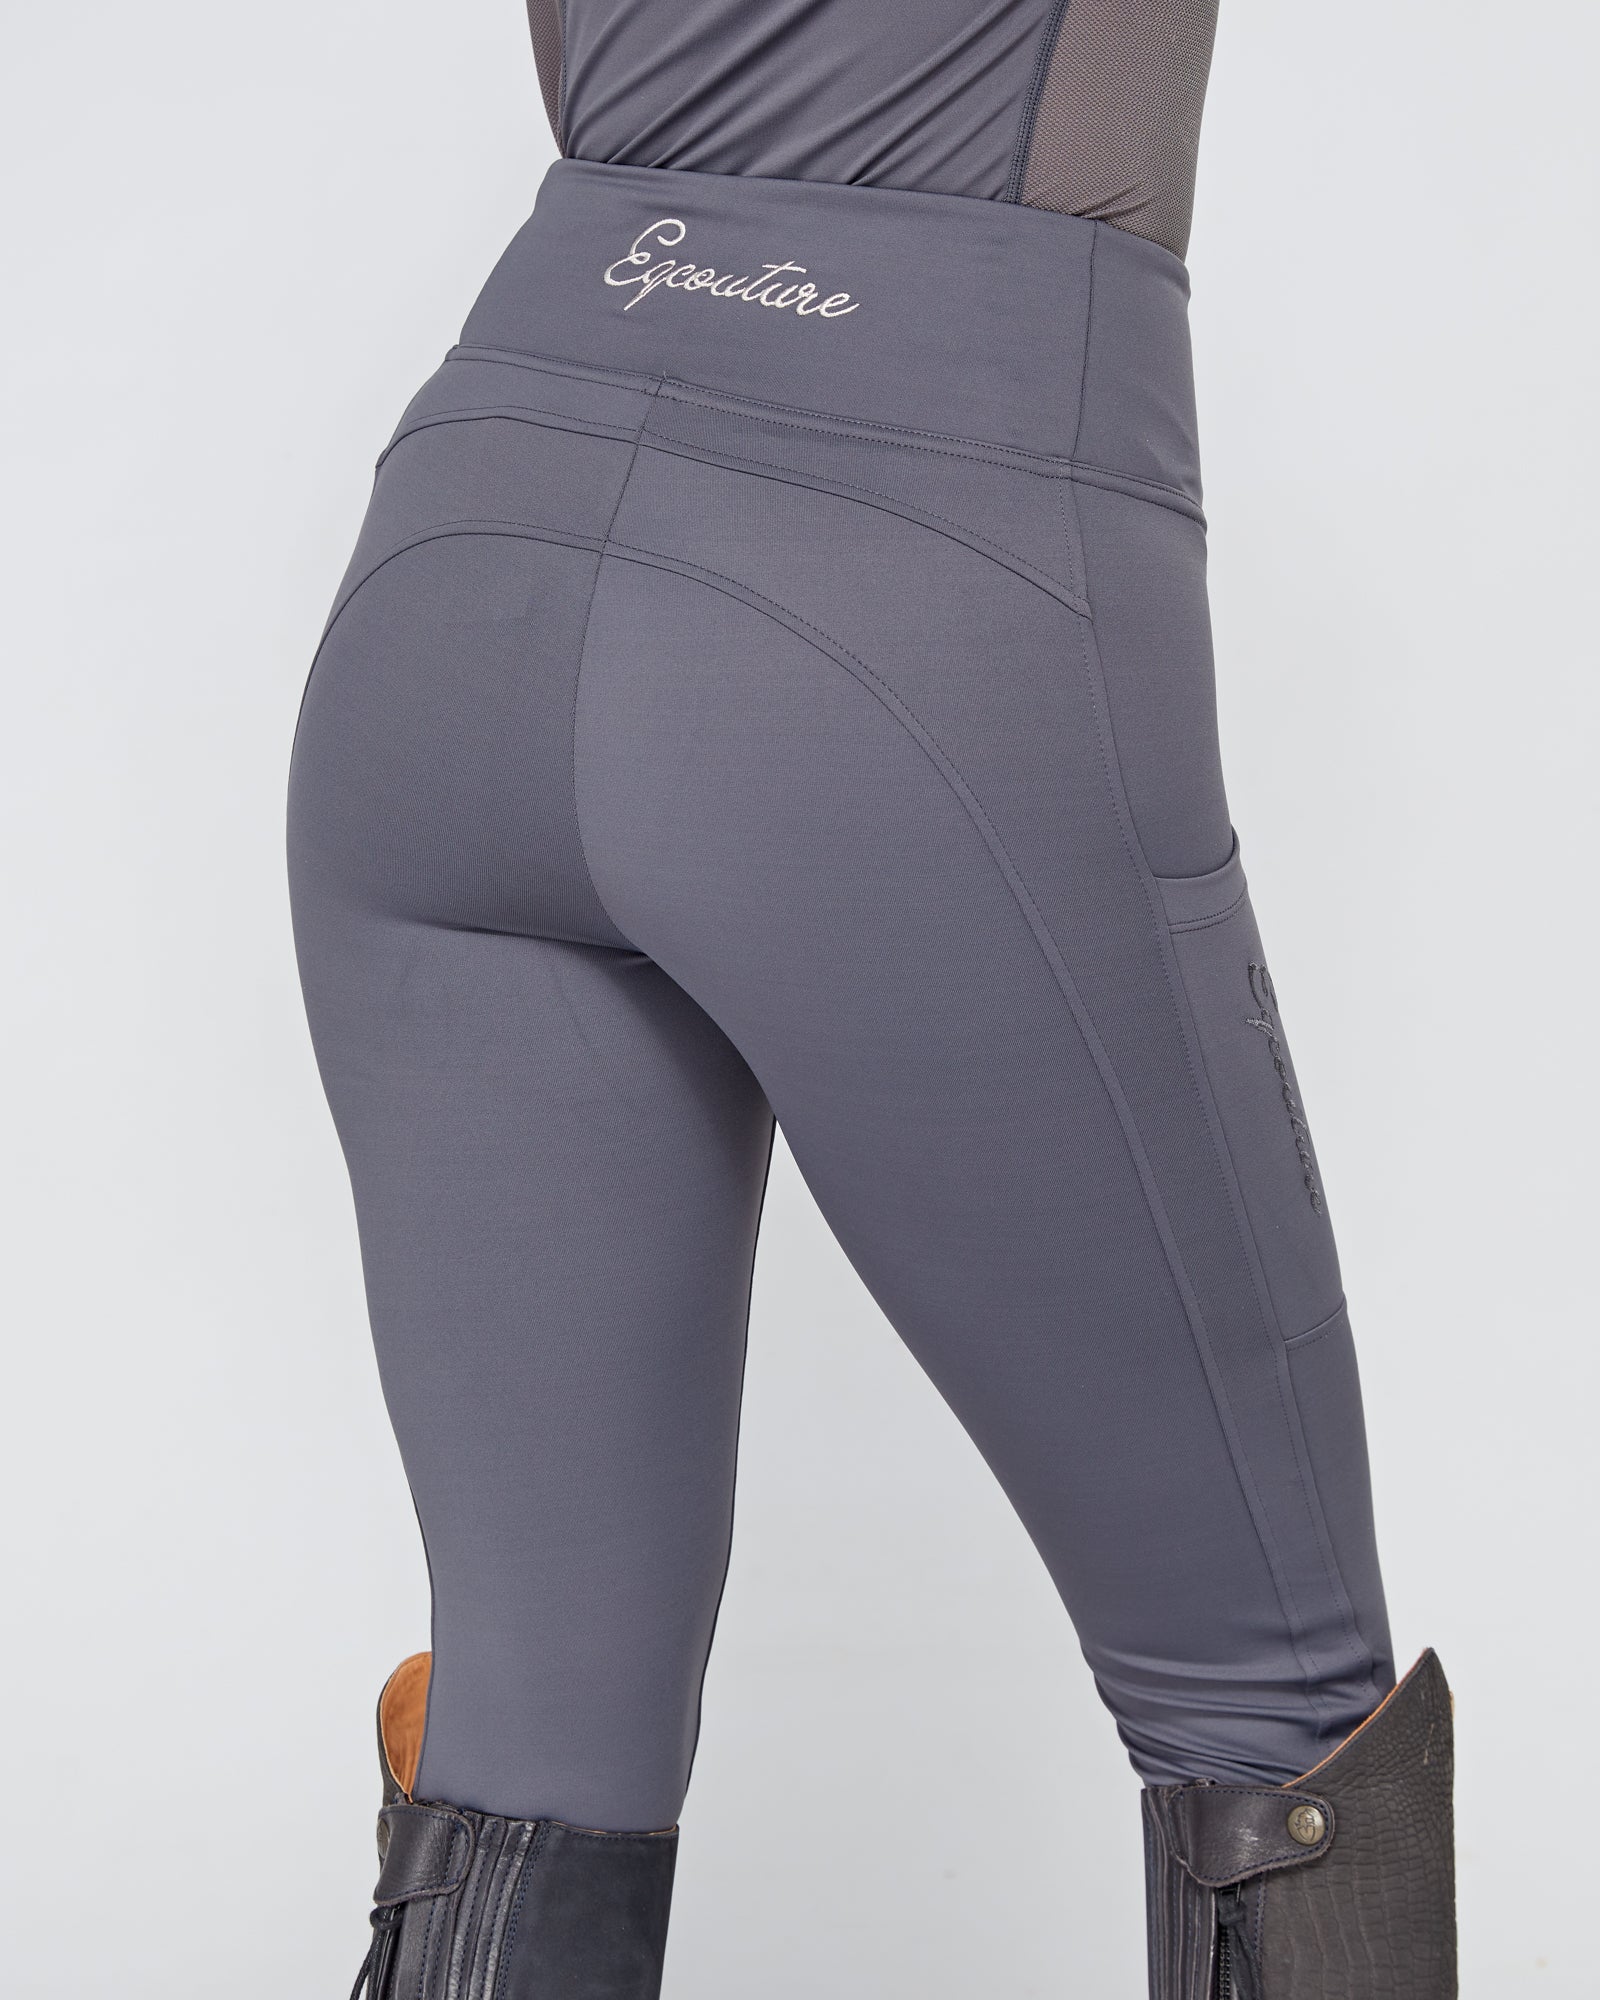 Slate Grey Riding Leggings / Tights with Phone Pockets - NO GRIP/ SILICONE